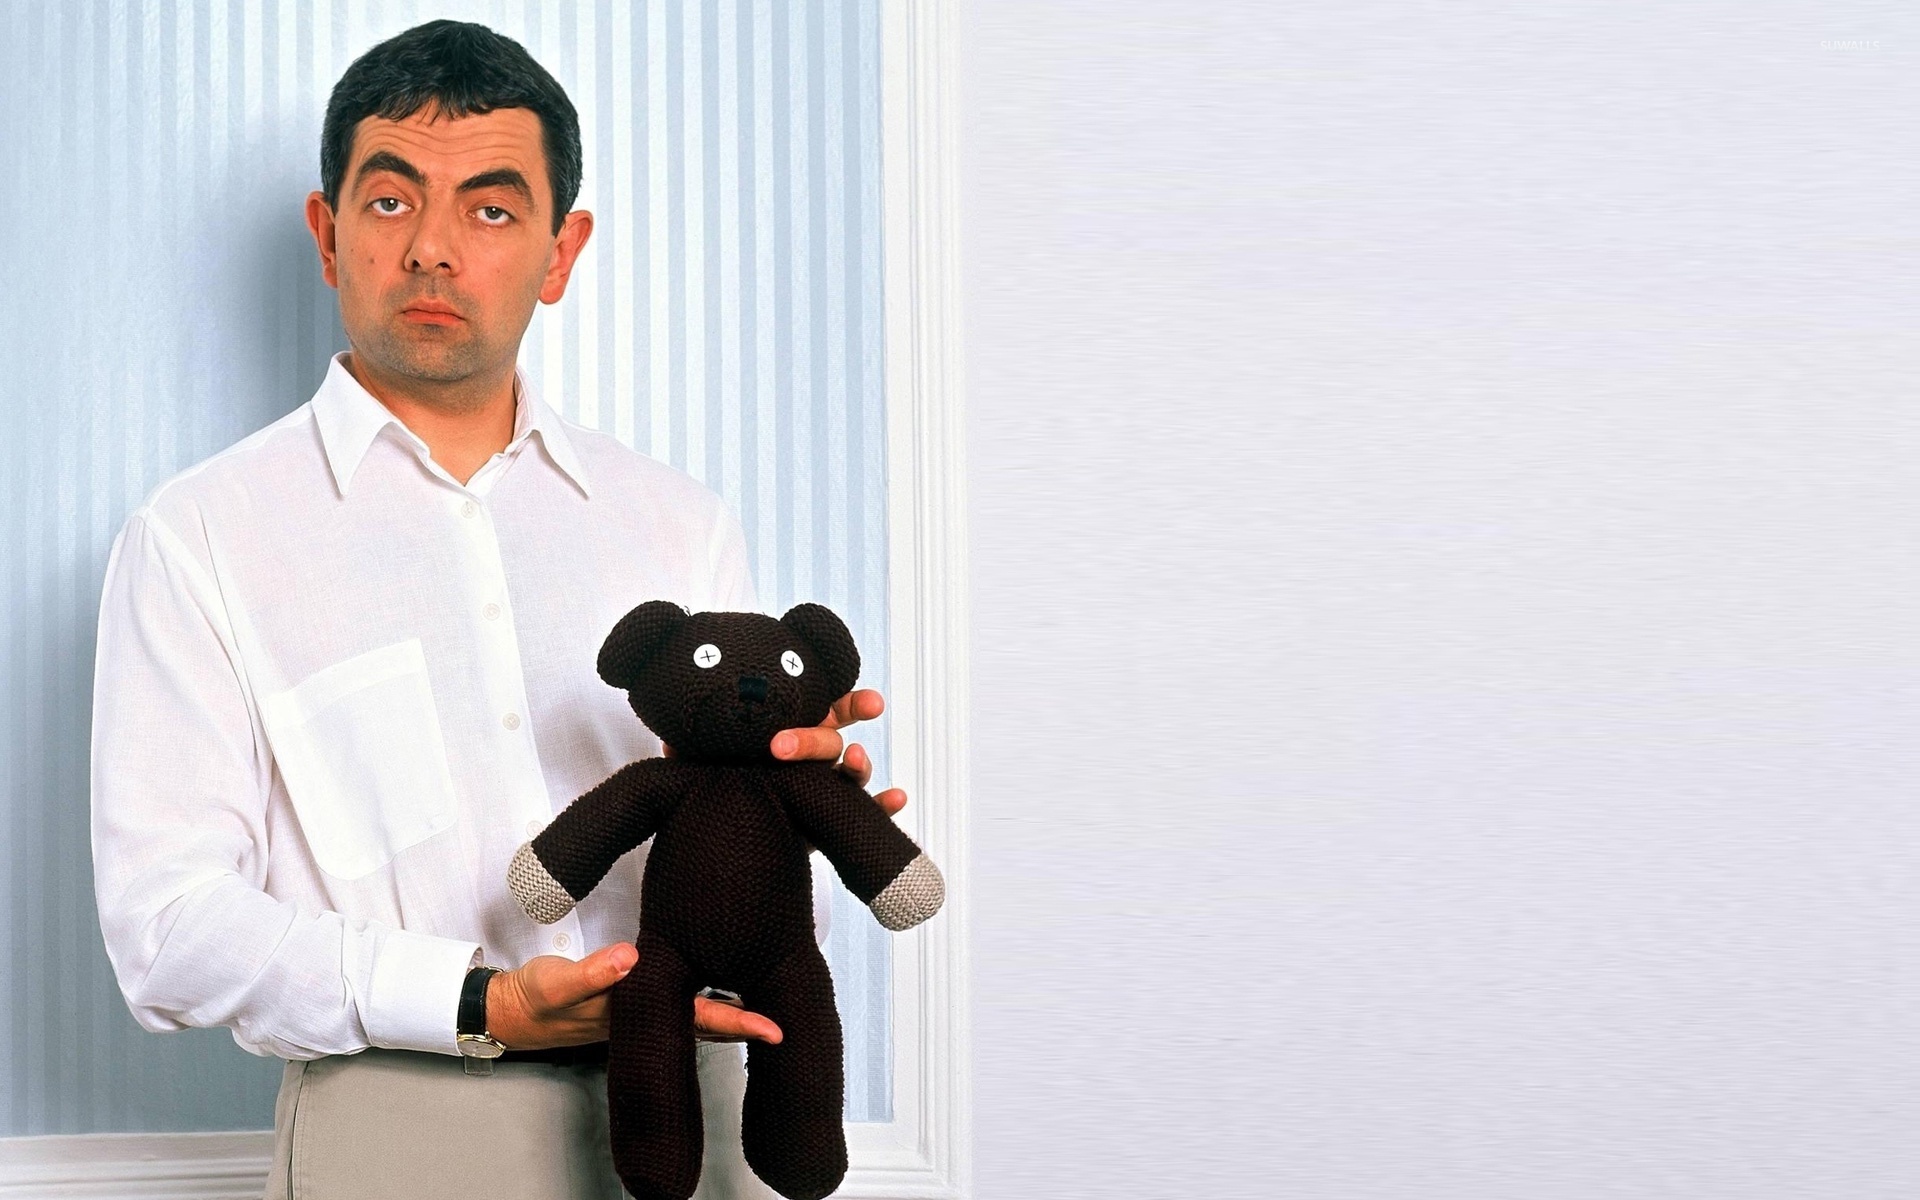 mr bean with his teddy